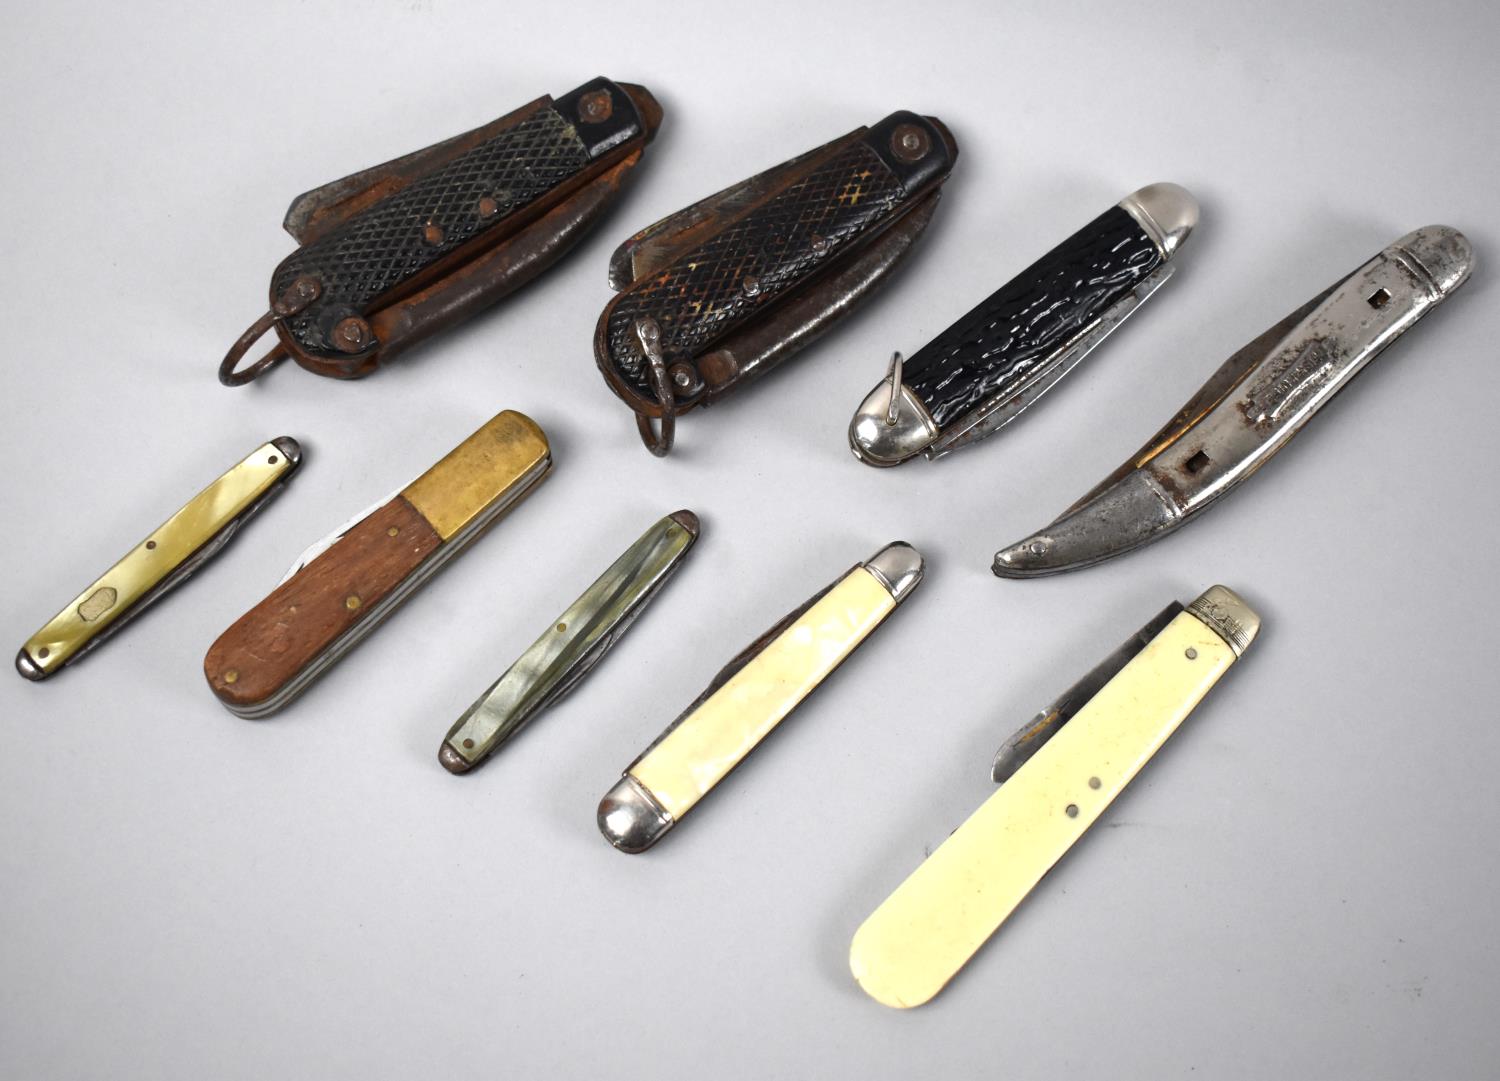 A Collection of Various Pocket Knives, Jack Knives, Multi Tool Knives, Fishermans Knives Etc